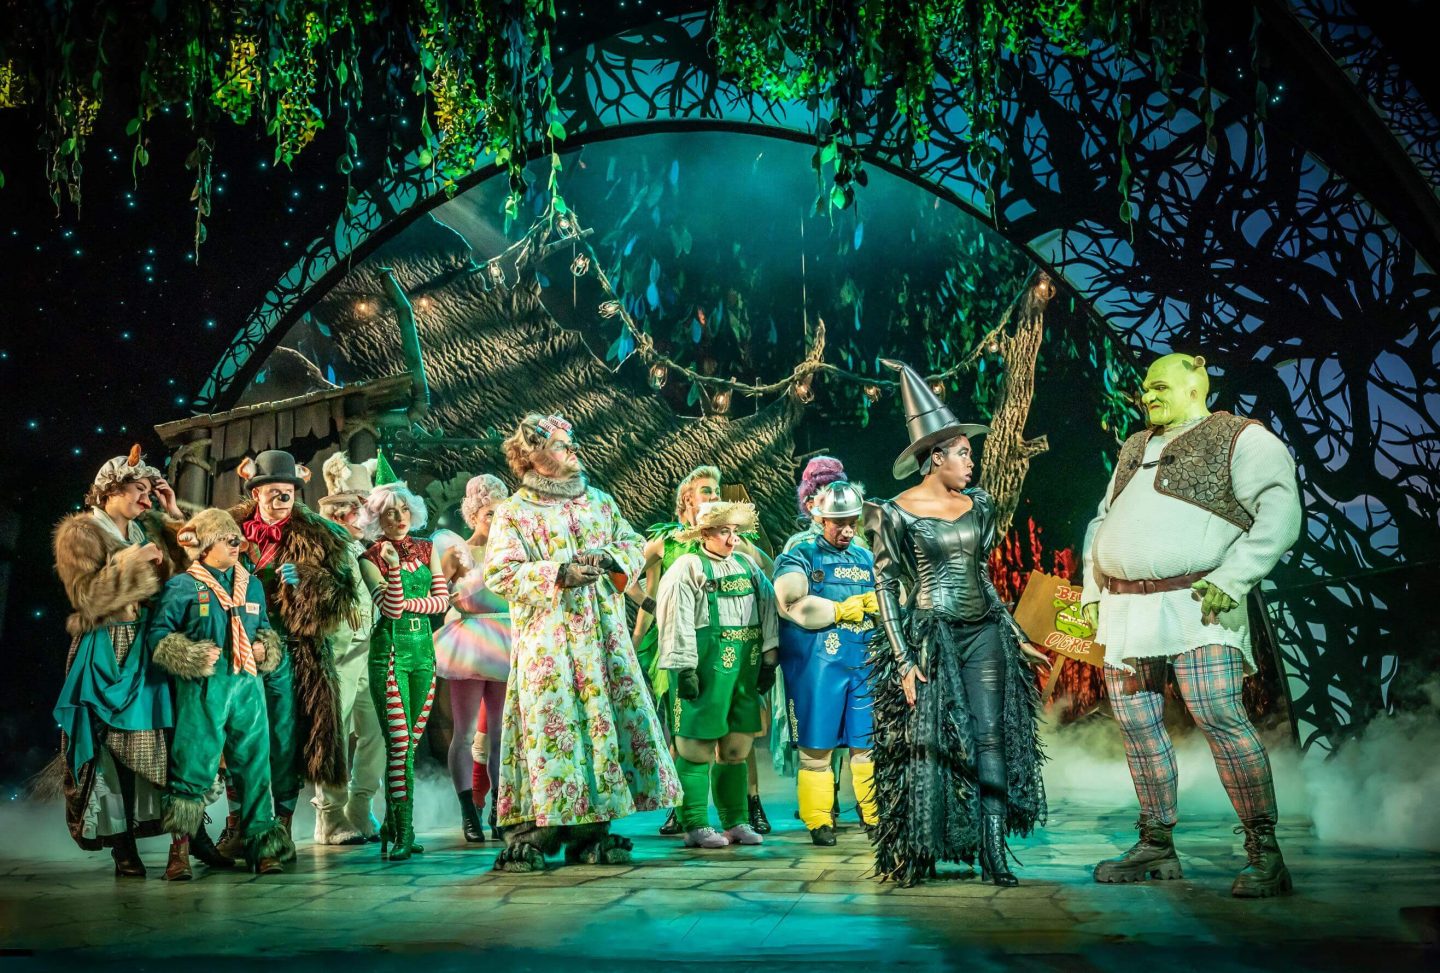 The cast of Shrek the Musical on stage